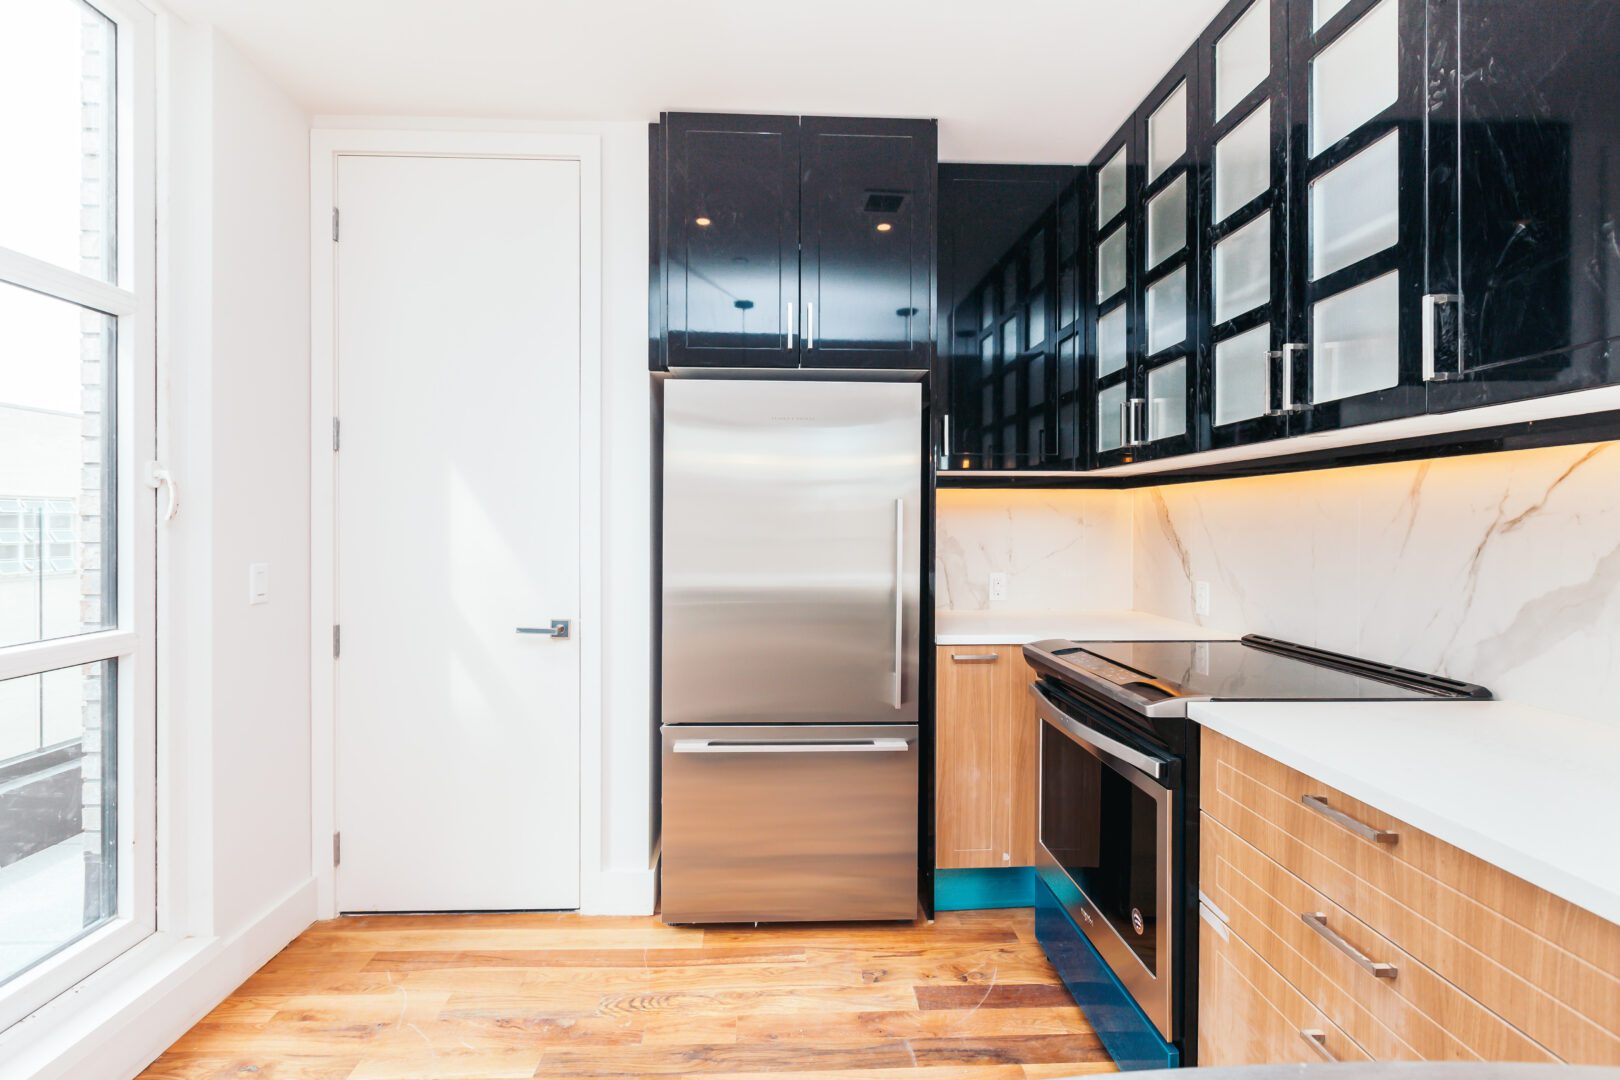 A kitchen with black cabinets and stainless steel refrigerator.